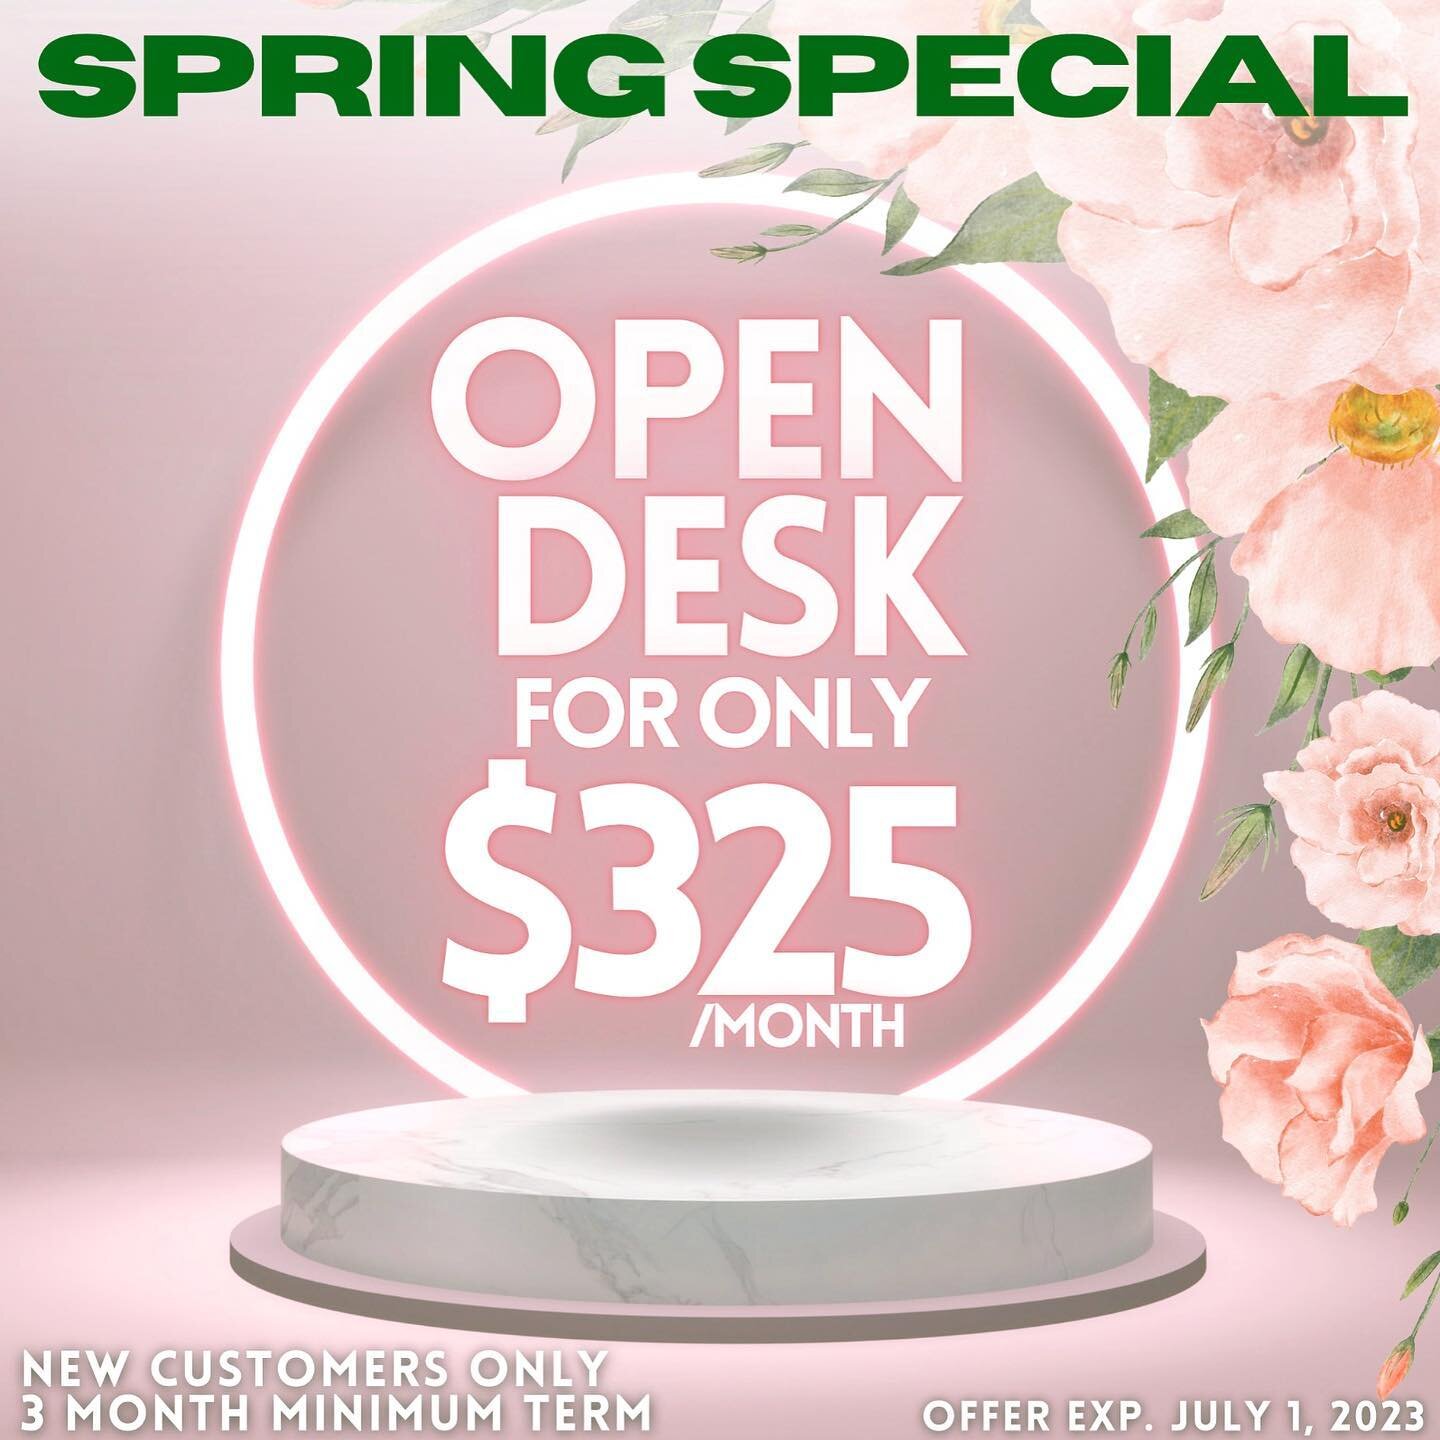 Our most popular membership option is now available for $325/month! An Open Desk Membership provides 24/7 access to our award winning space, and full use of our 50+ desks, 5 private phone booths for calls, 2 cafe areas, &amp; outdoor courtyard! Conta